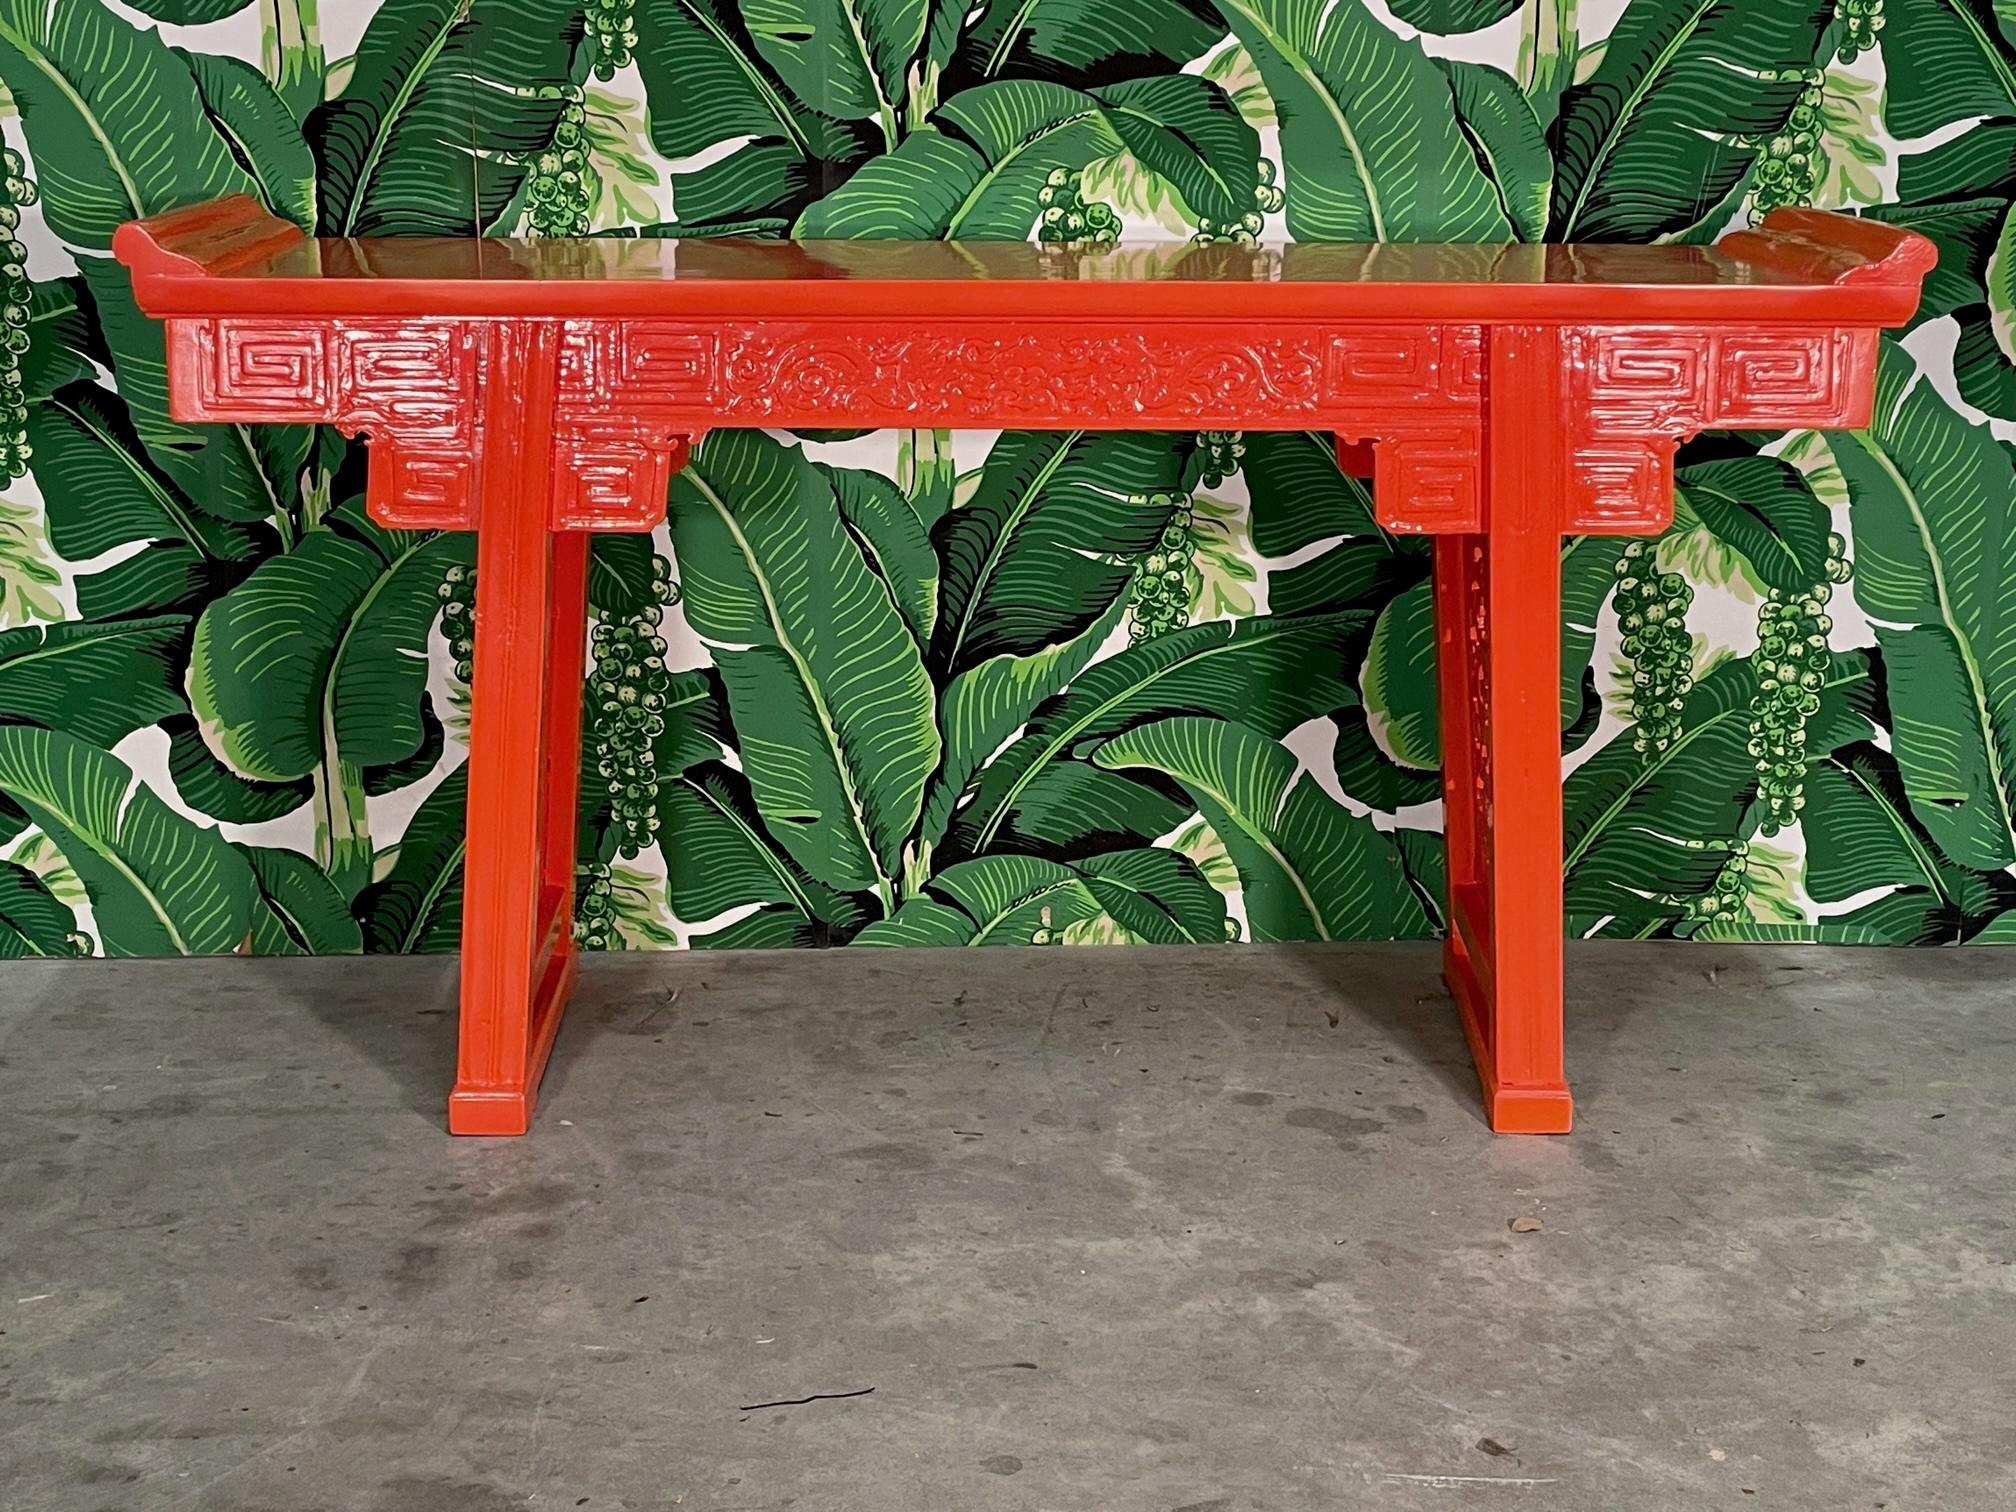 Asian carved altar or console table features hand carved images of dragons along the frieze and ornate snake images in the pierce carved leg struts. Newly high gloss lacquer in an Hermes orange. Stands 36